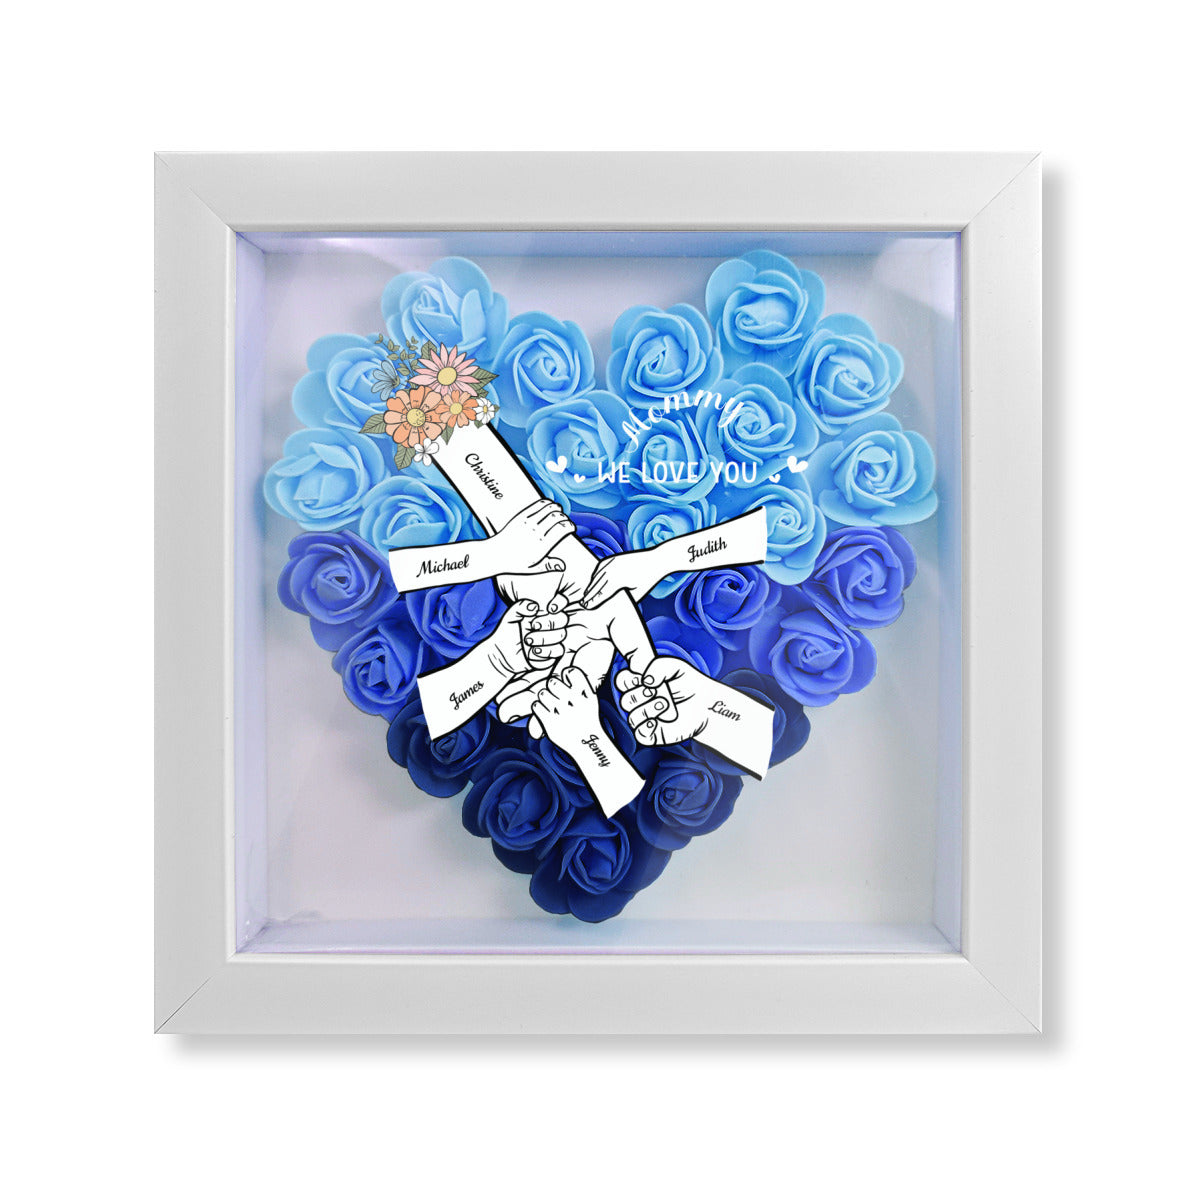 Mom and Kids Holding Hands-Personalized Flower Shadow Box gift for Mom